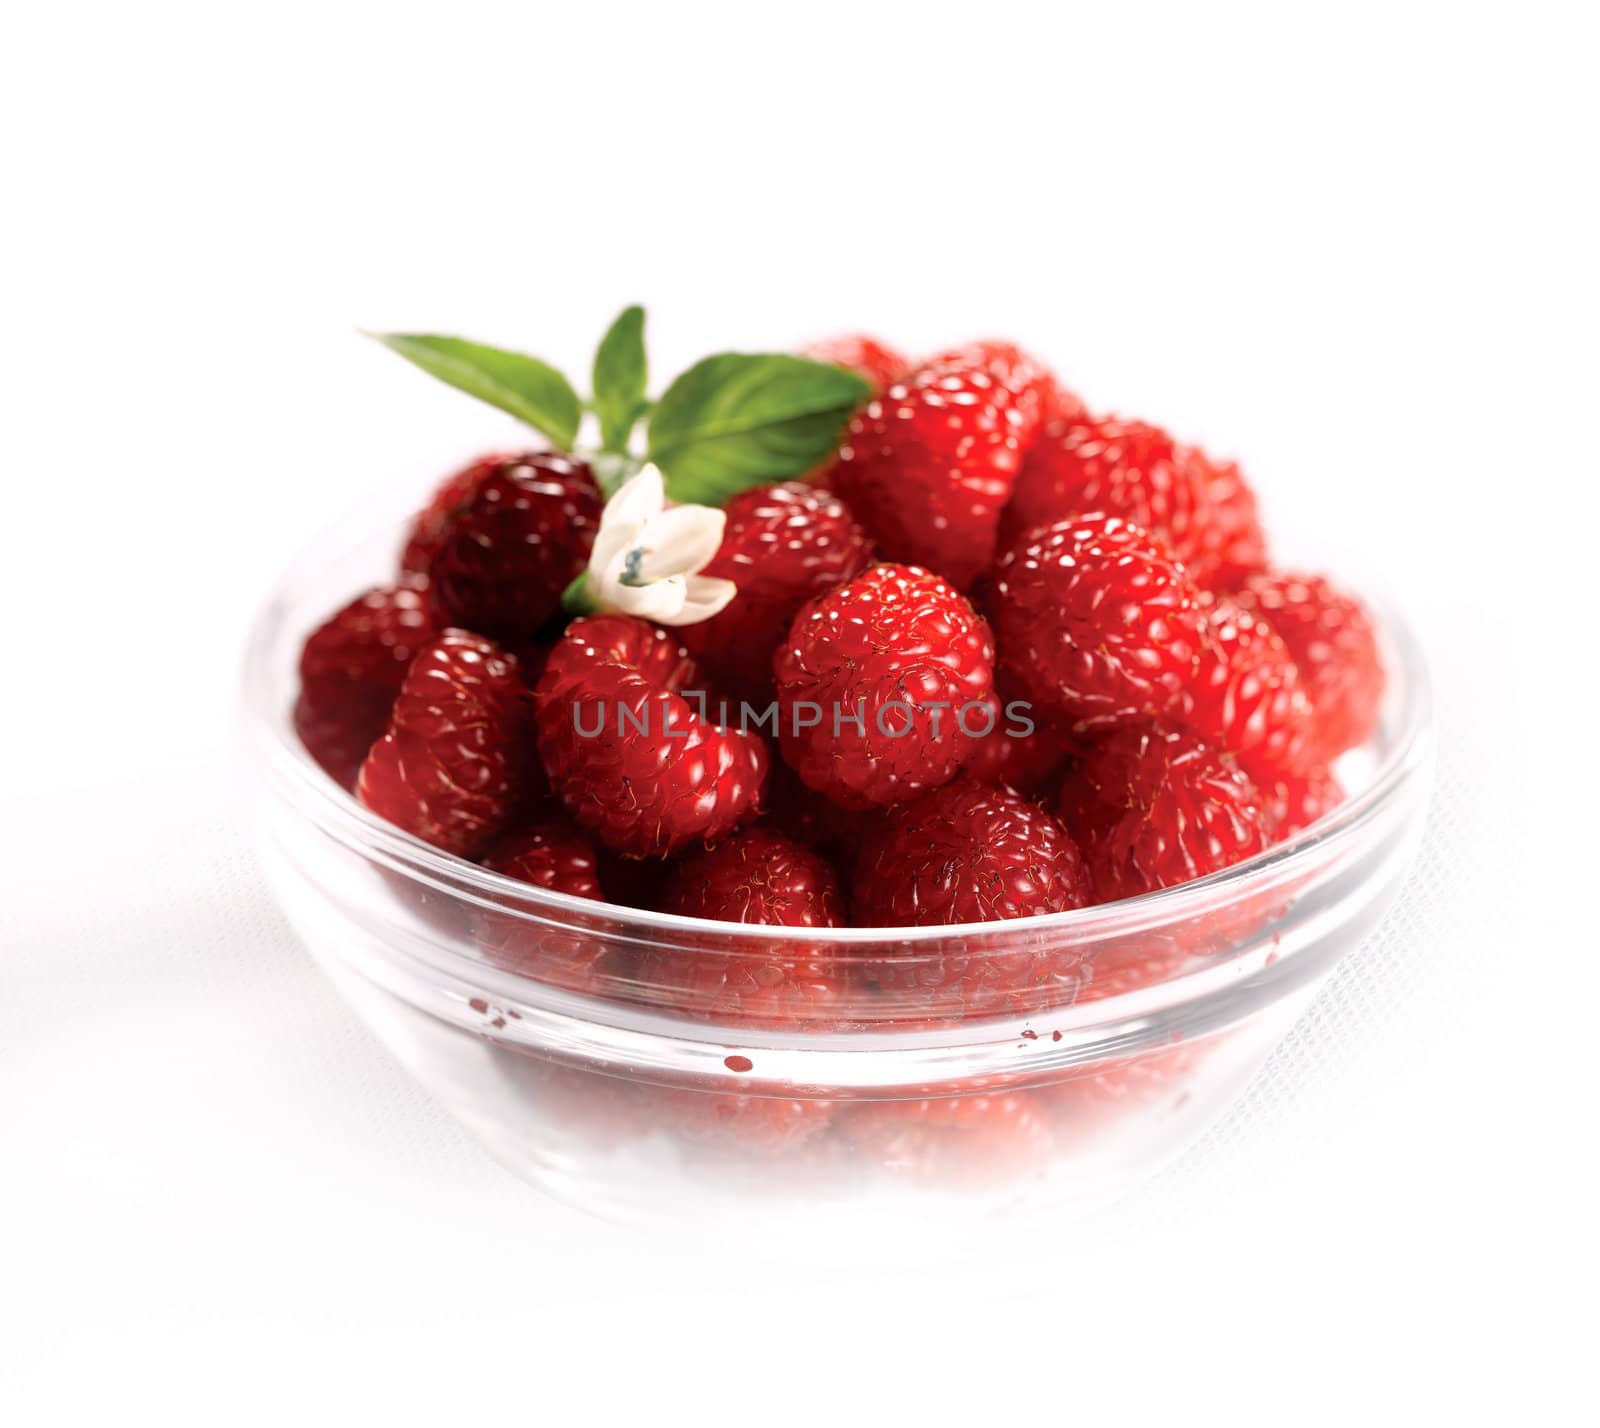 Assorted berries in bowl on natural background. Selectve focus